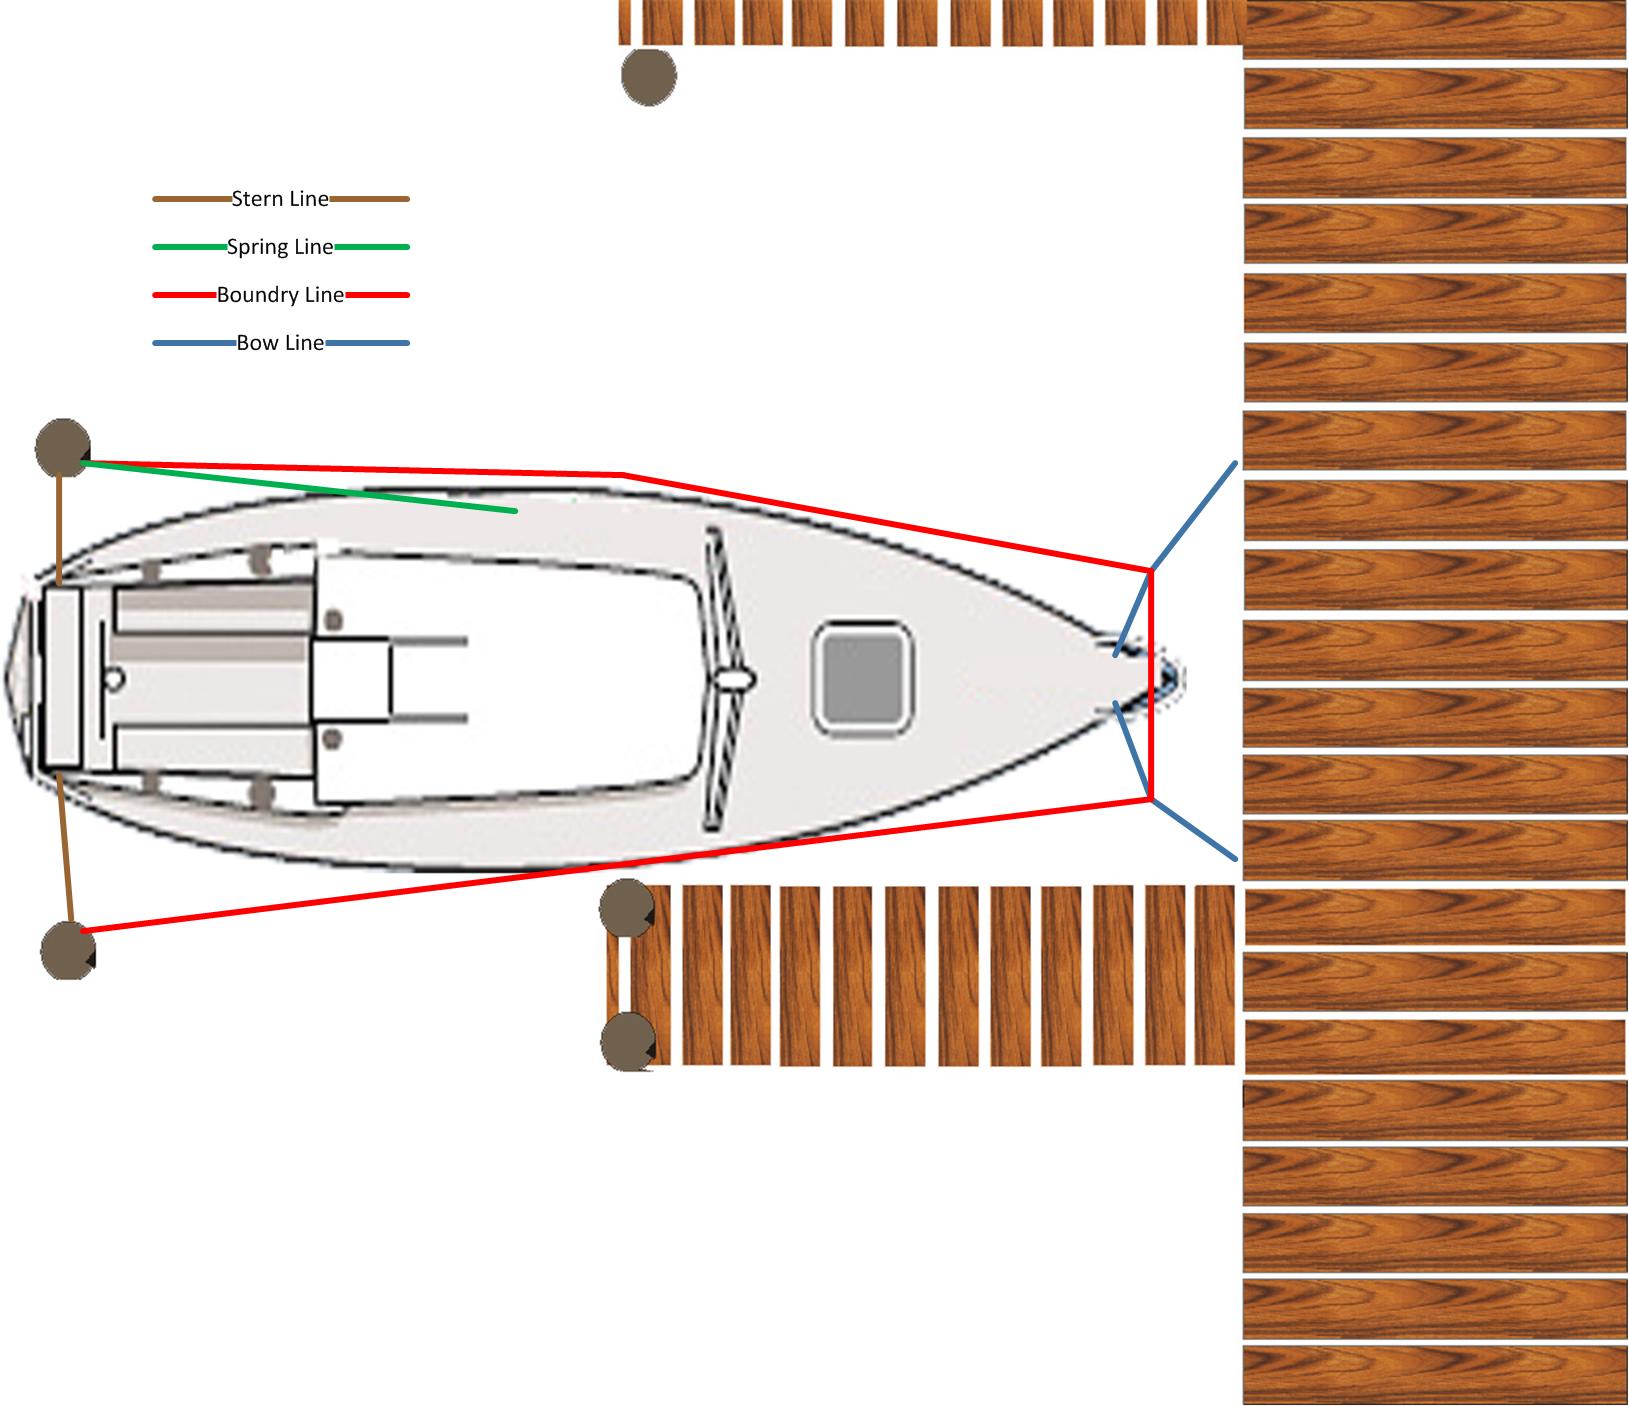 Moving boat to new slip. Dockline Questions.